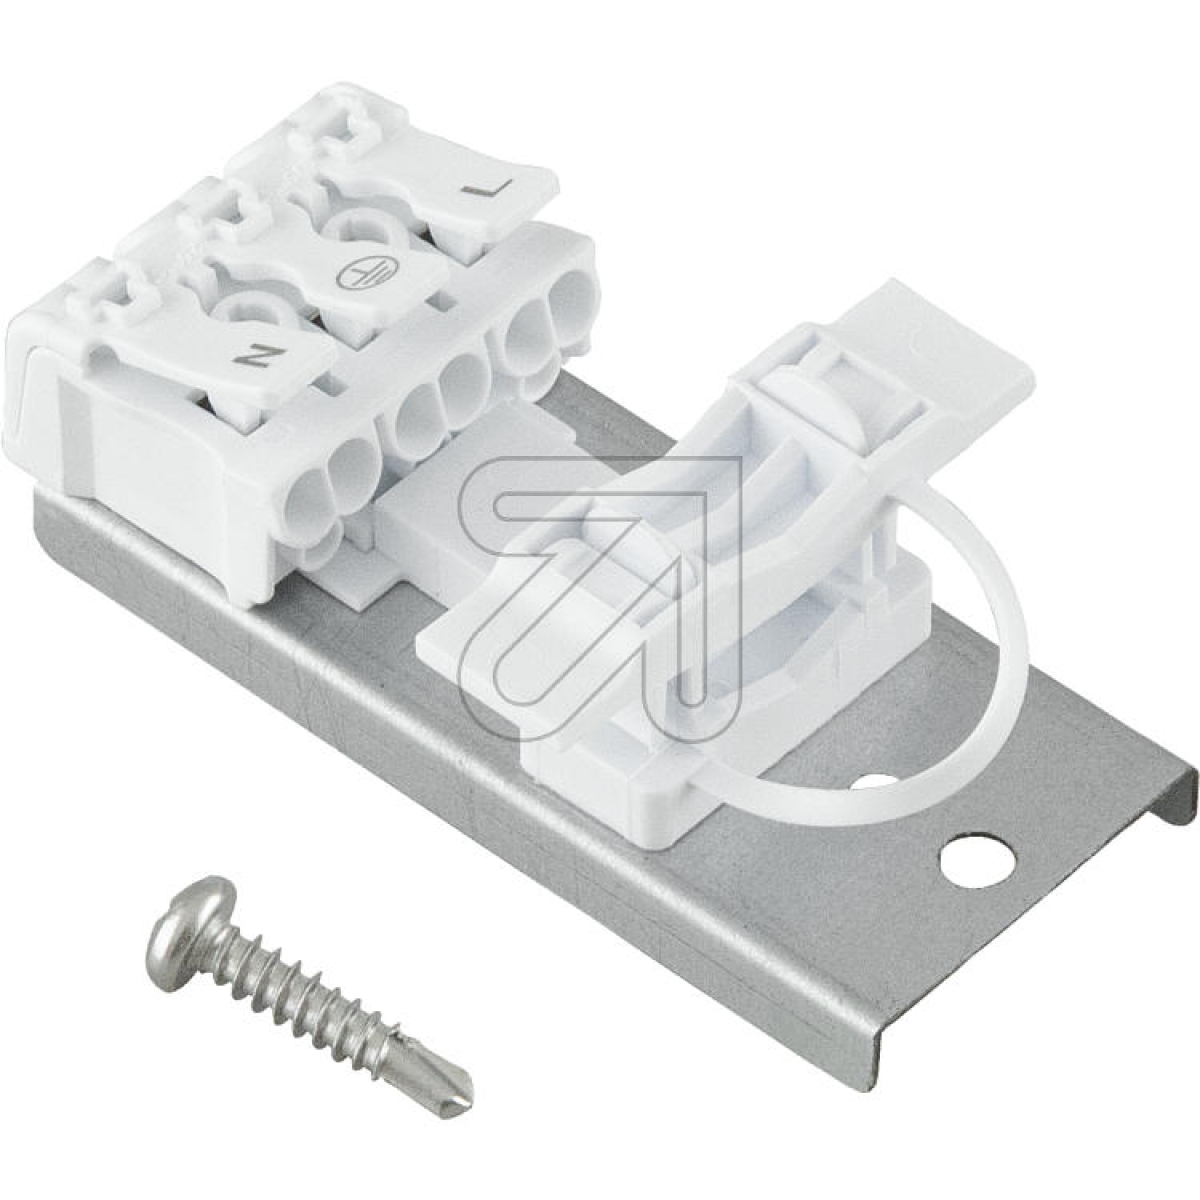 EVNMagnetic connection terminal for LUMASK luminaire conversionArticle-No: 541775